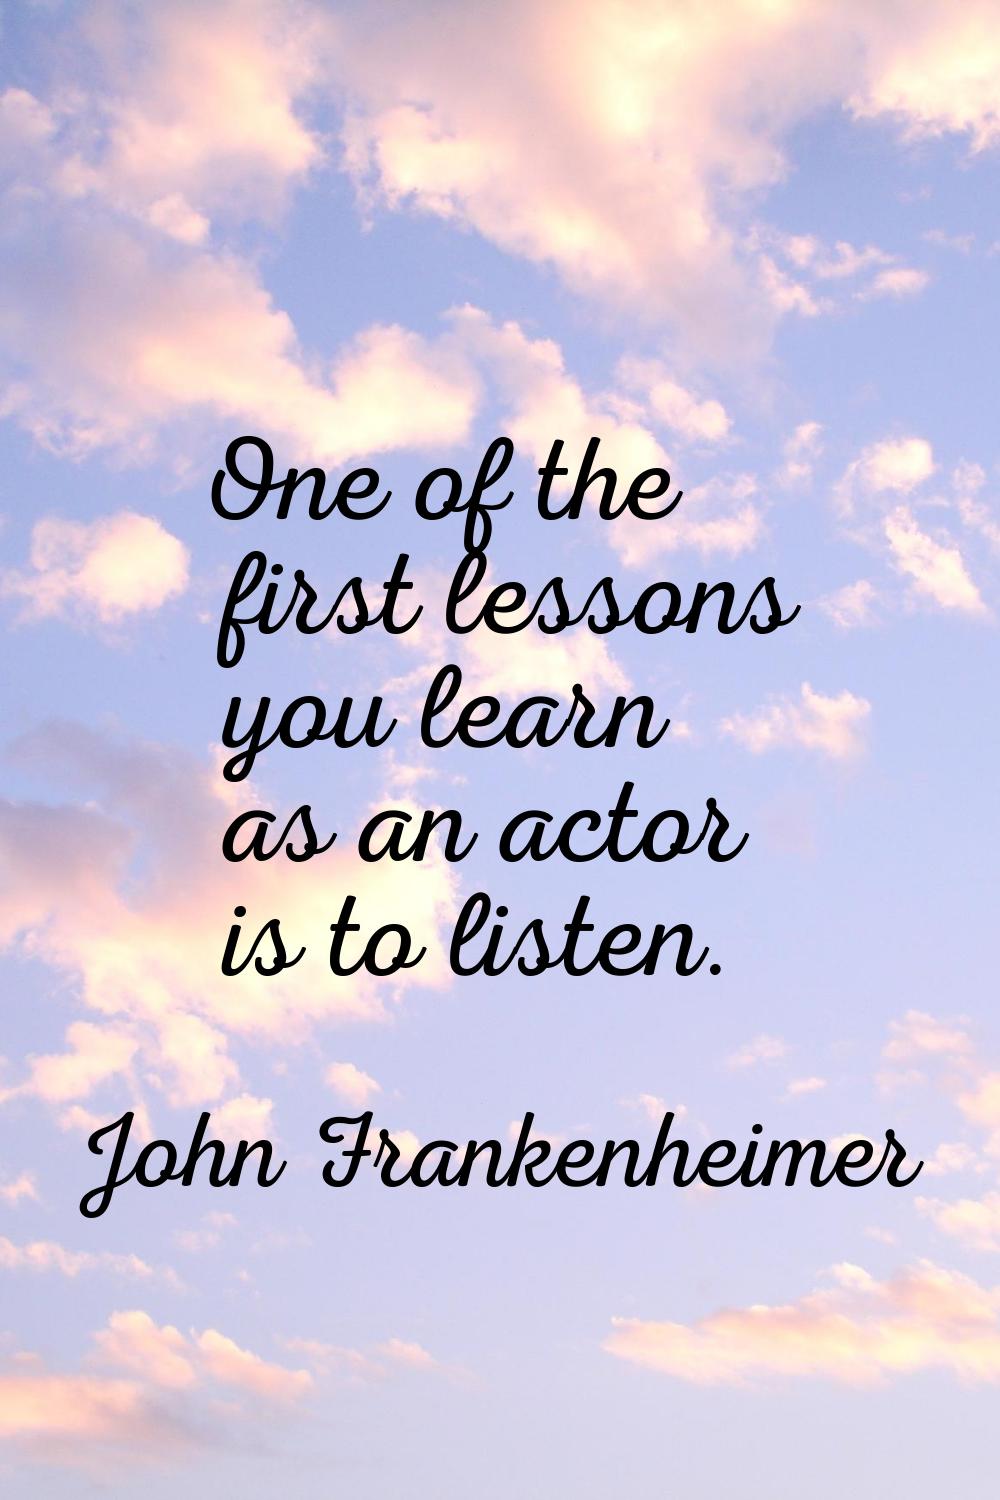 One of the first lessons you learn as an actor is to listen.